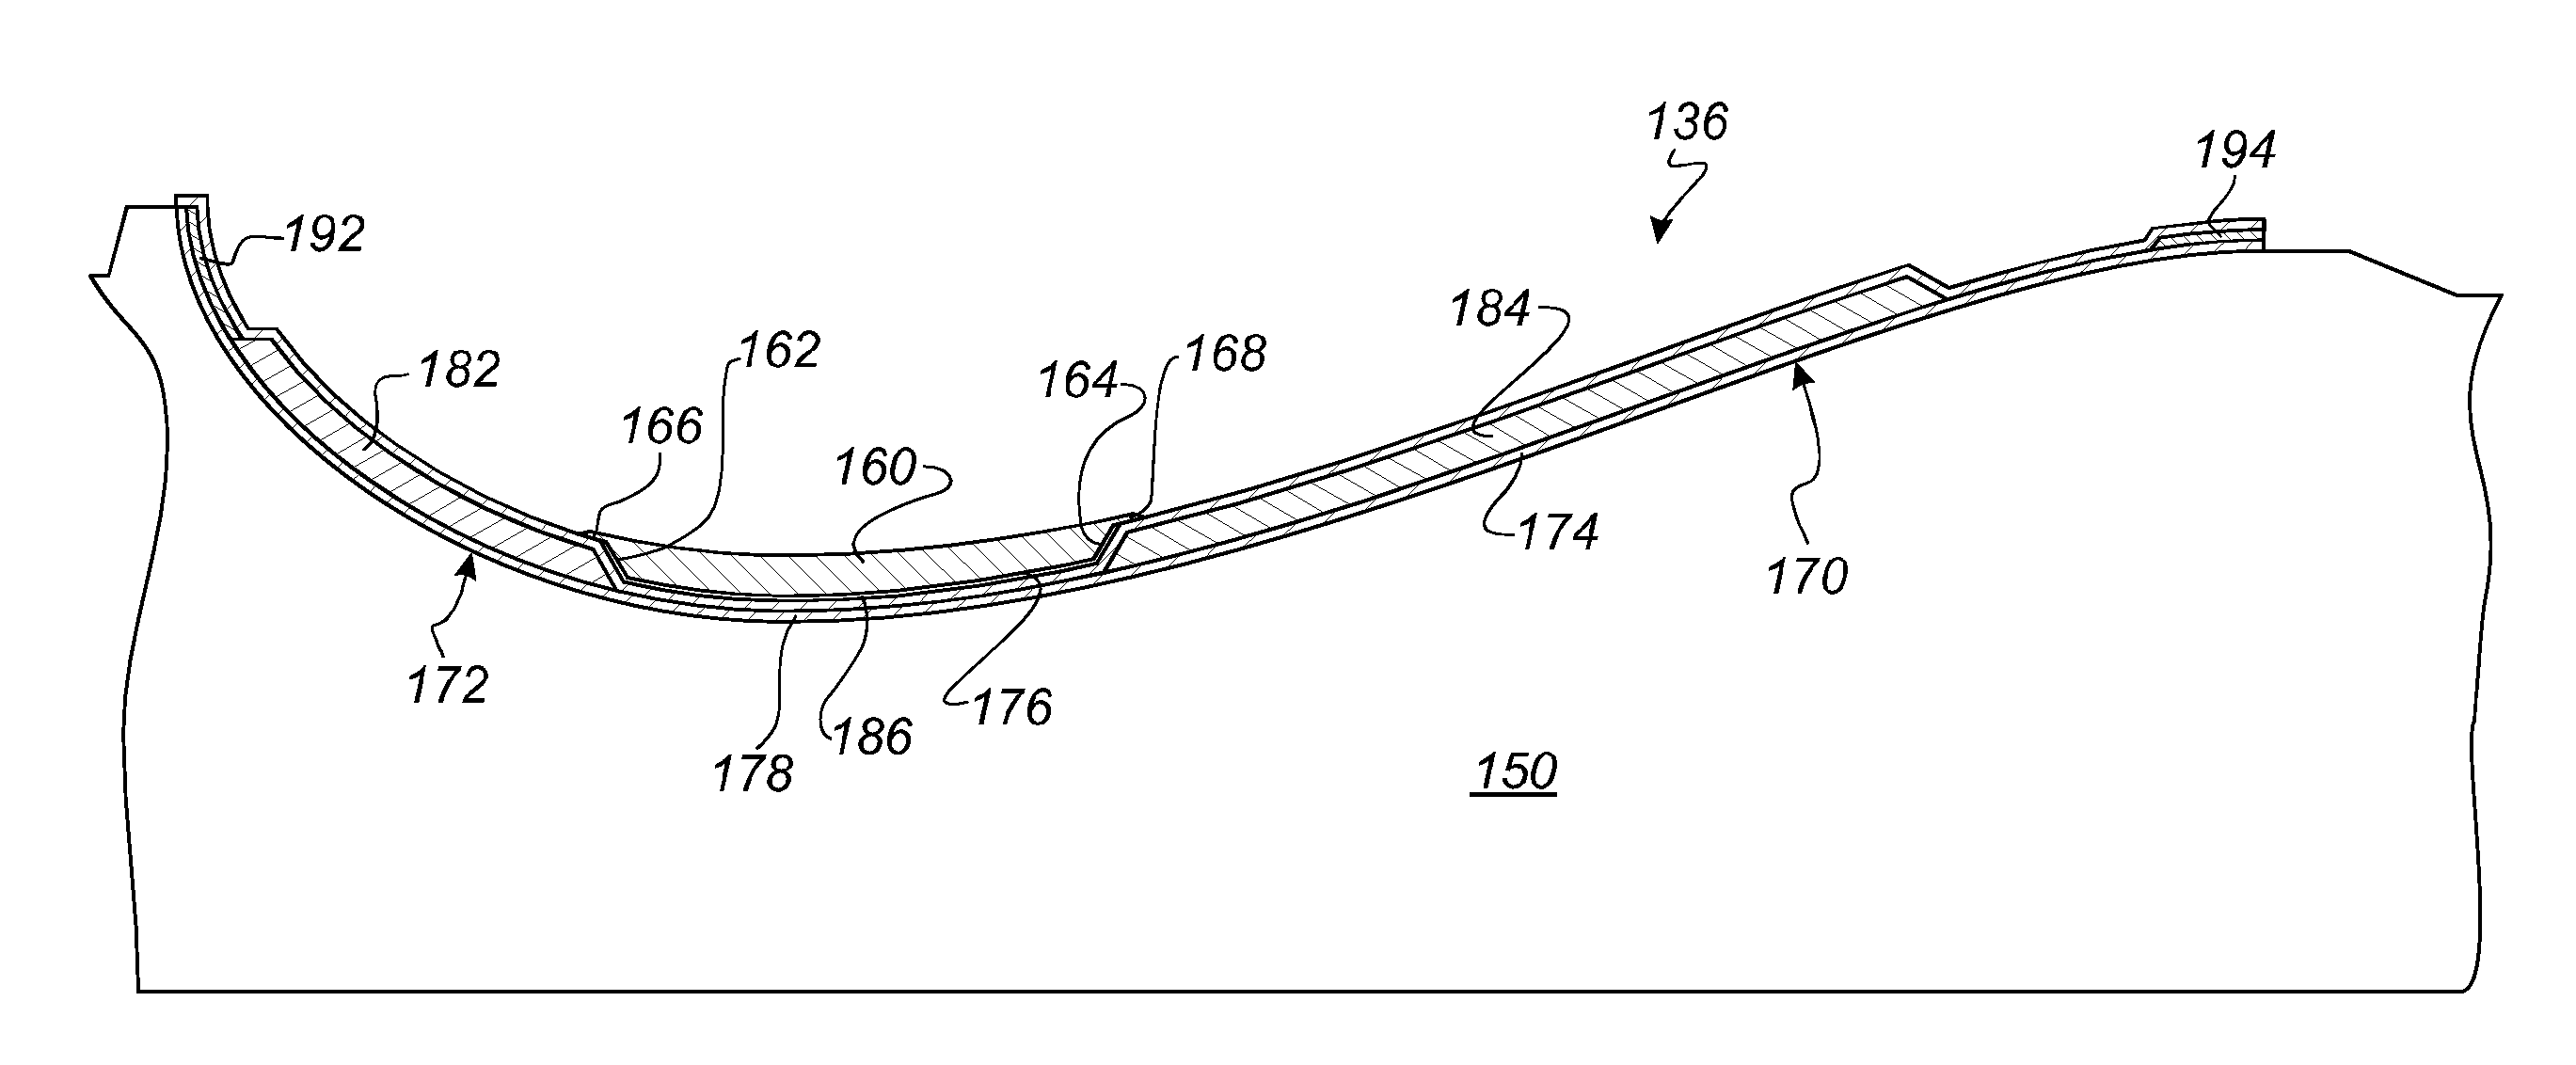 A wind turbine blade comprising an aerodynamic blade shell with recess and pre-manufactured spar cap